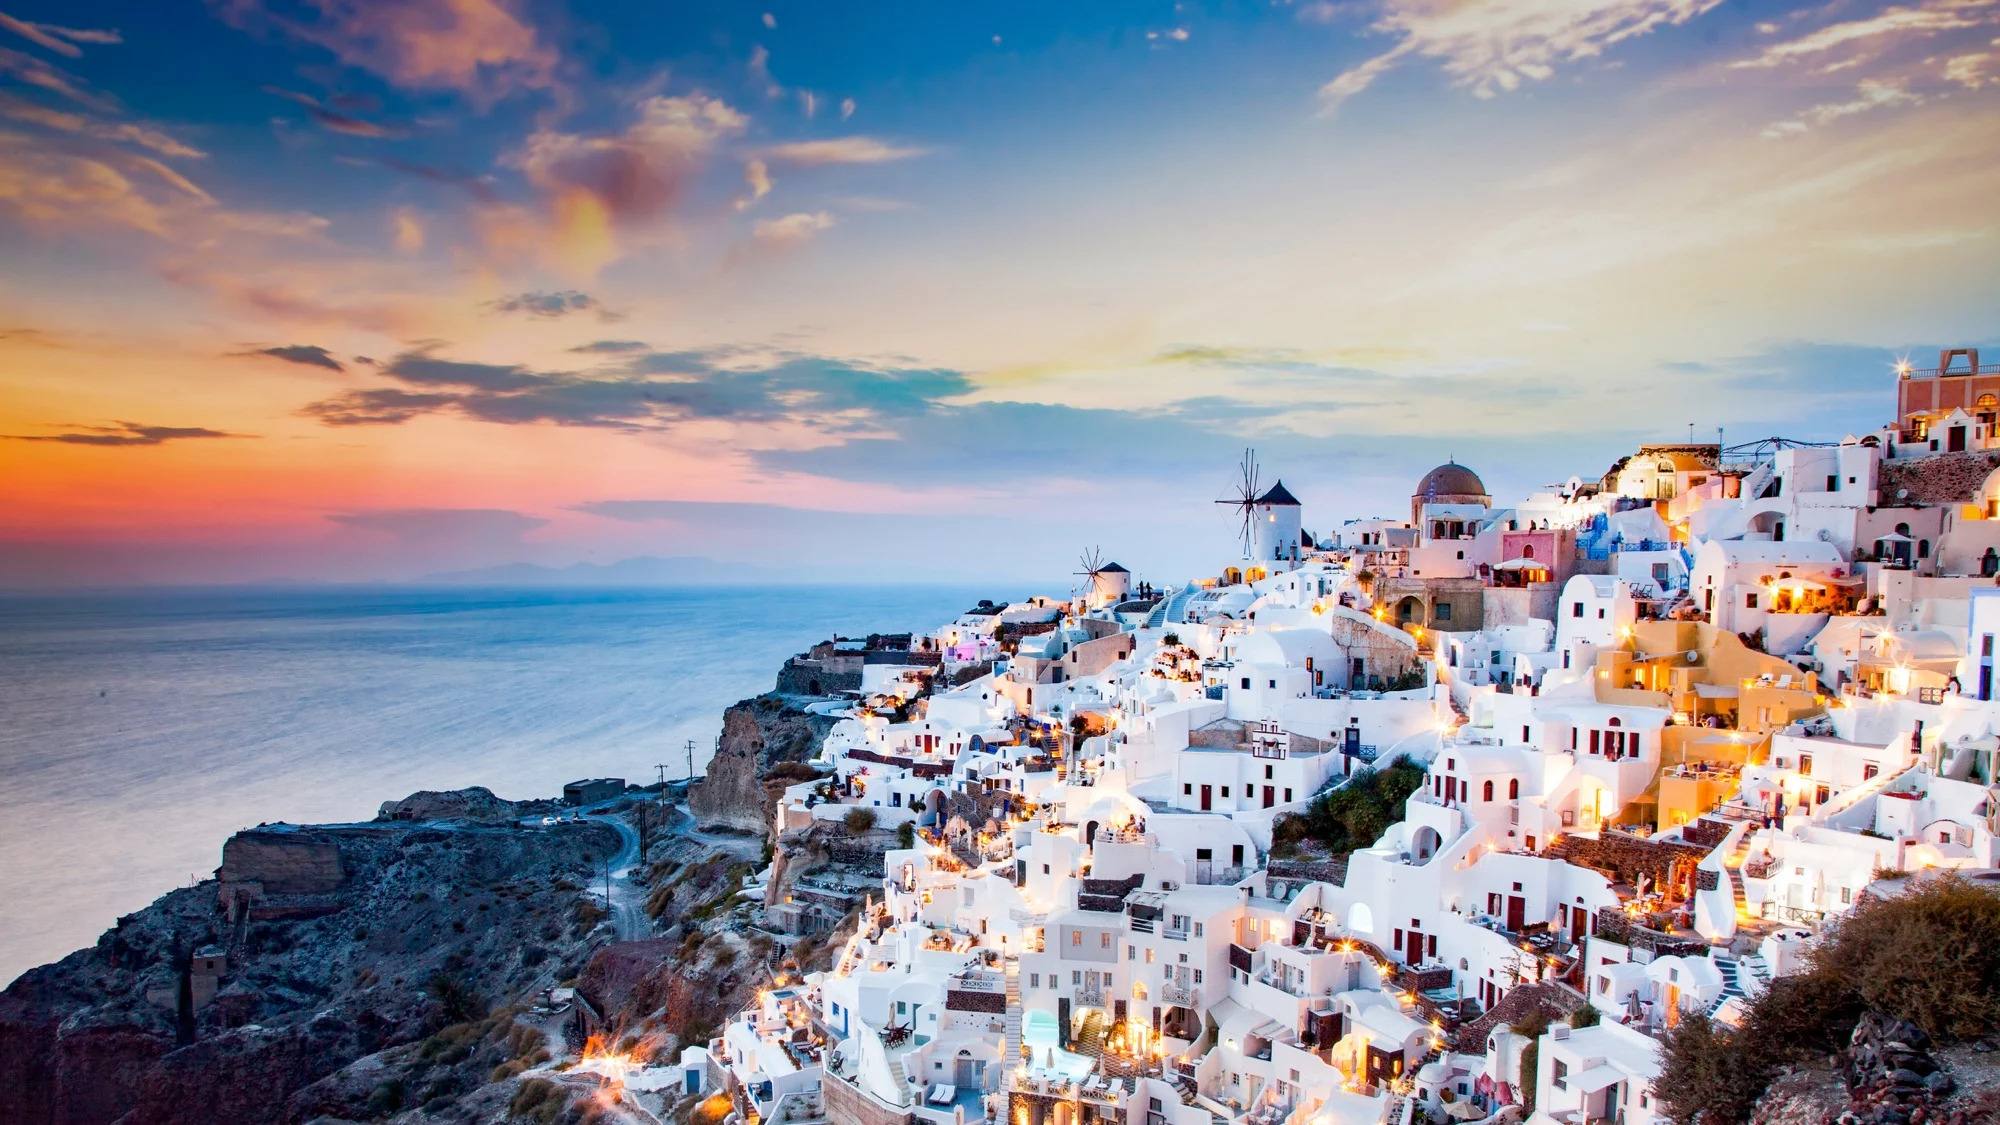 Costs Of Travel: Is Greece Expensive To Travel?